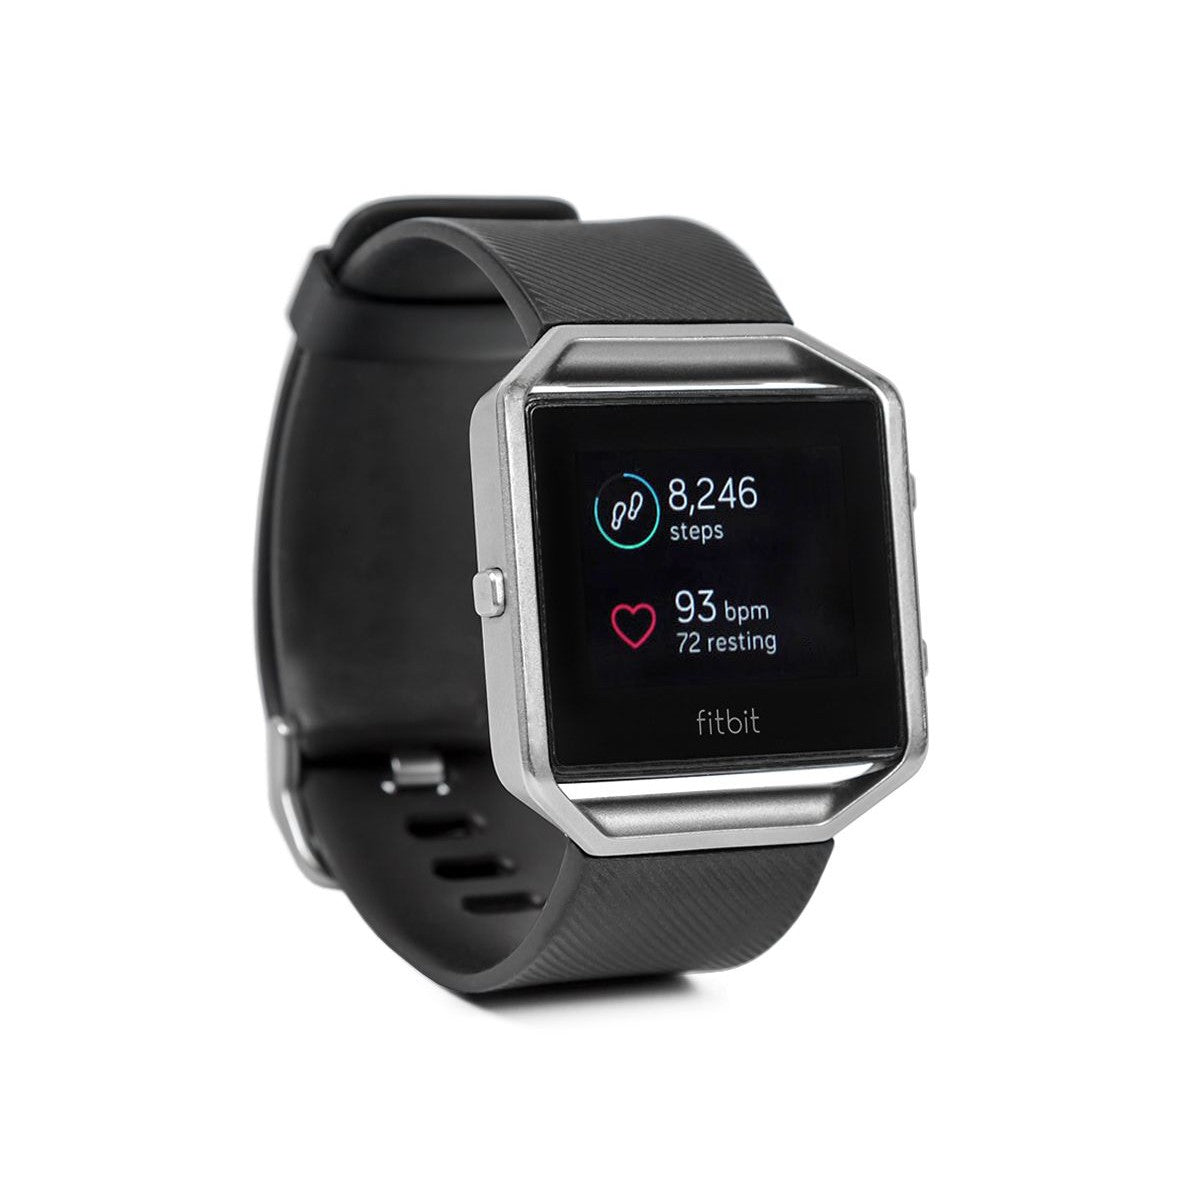 Fitbit Blaze Fitness Activity Tracker - Black - Refurbished Good - NO CHARGER